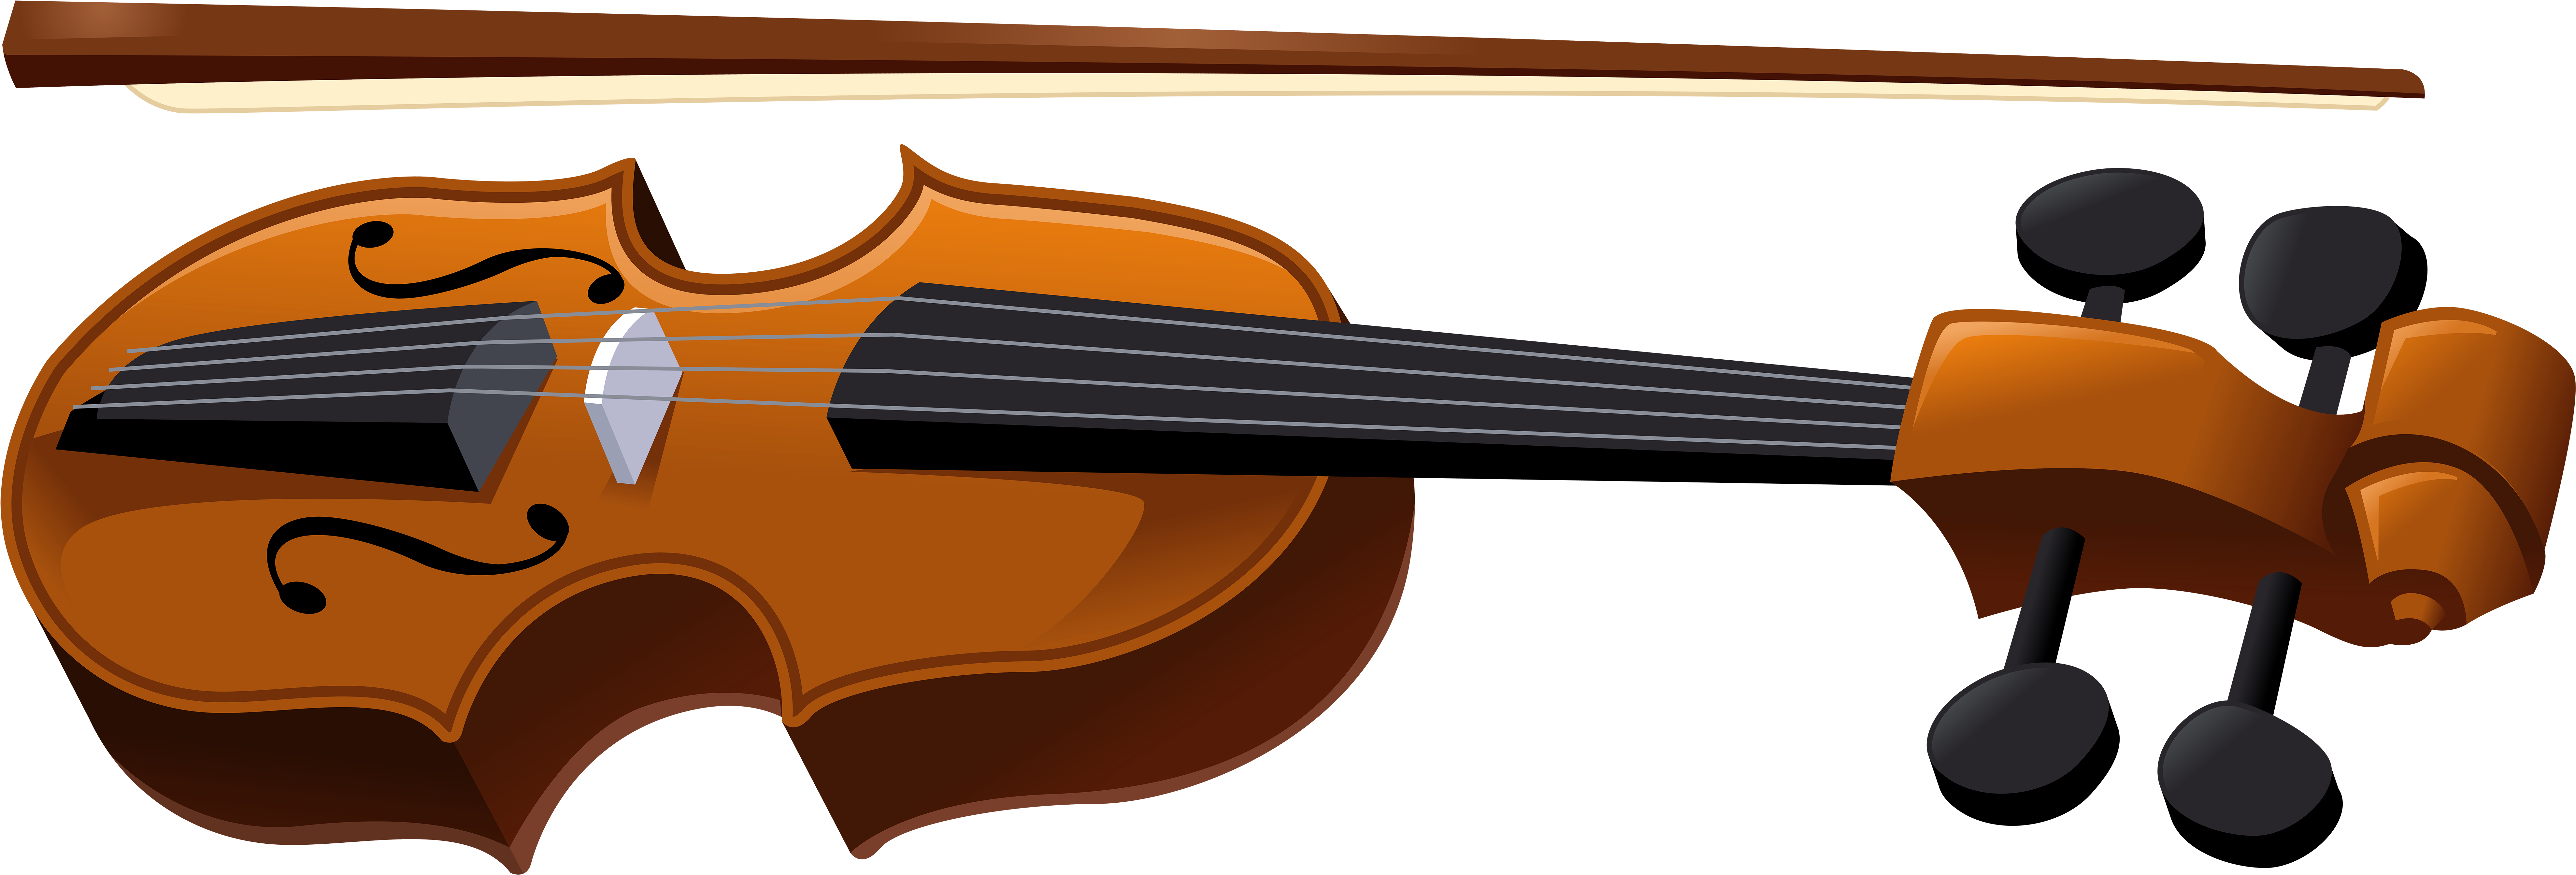 Musical Instruments Png 7908 X 2686